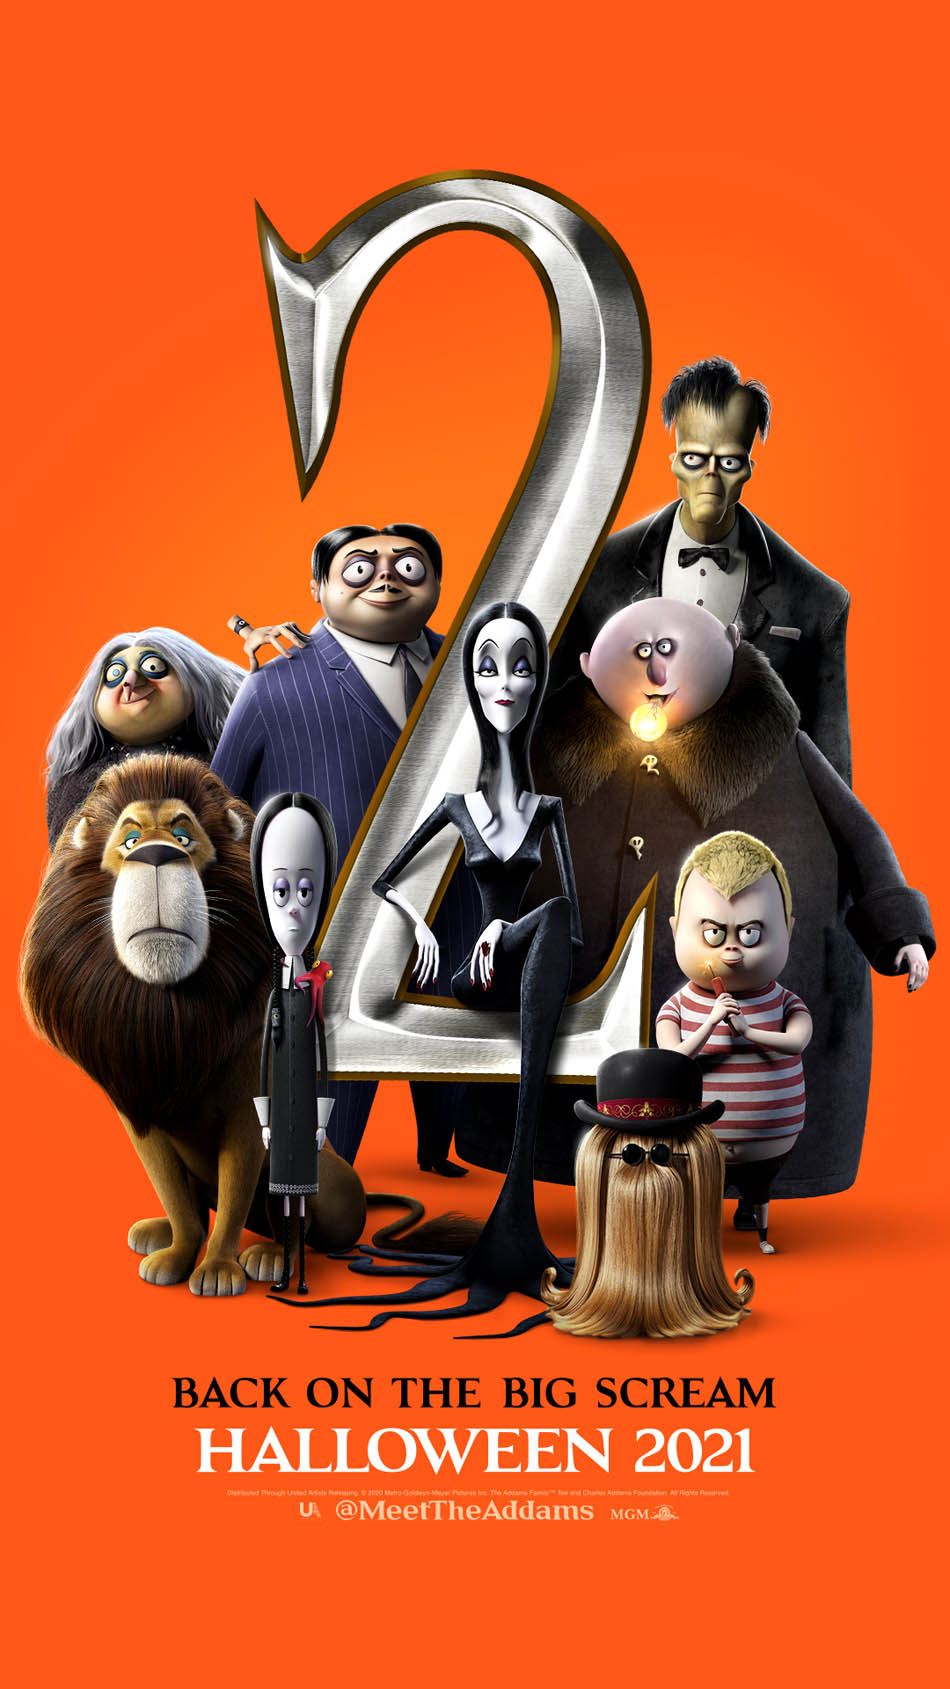 The Addams Family 2 Parents Guide